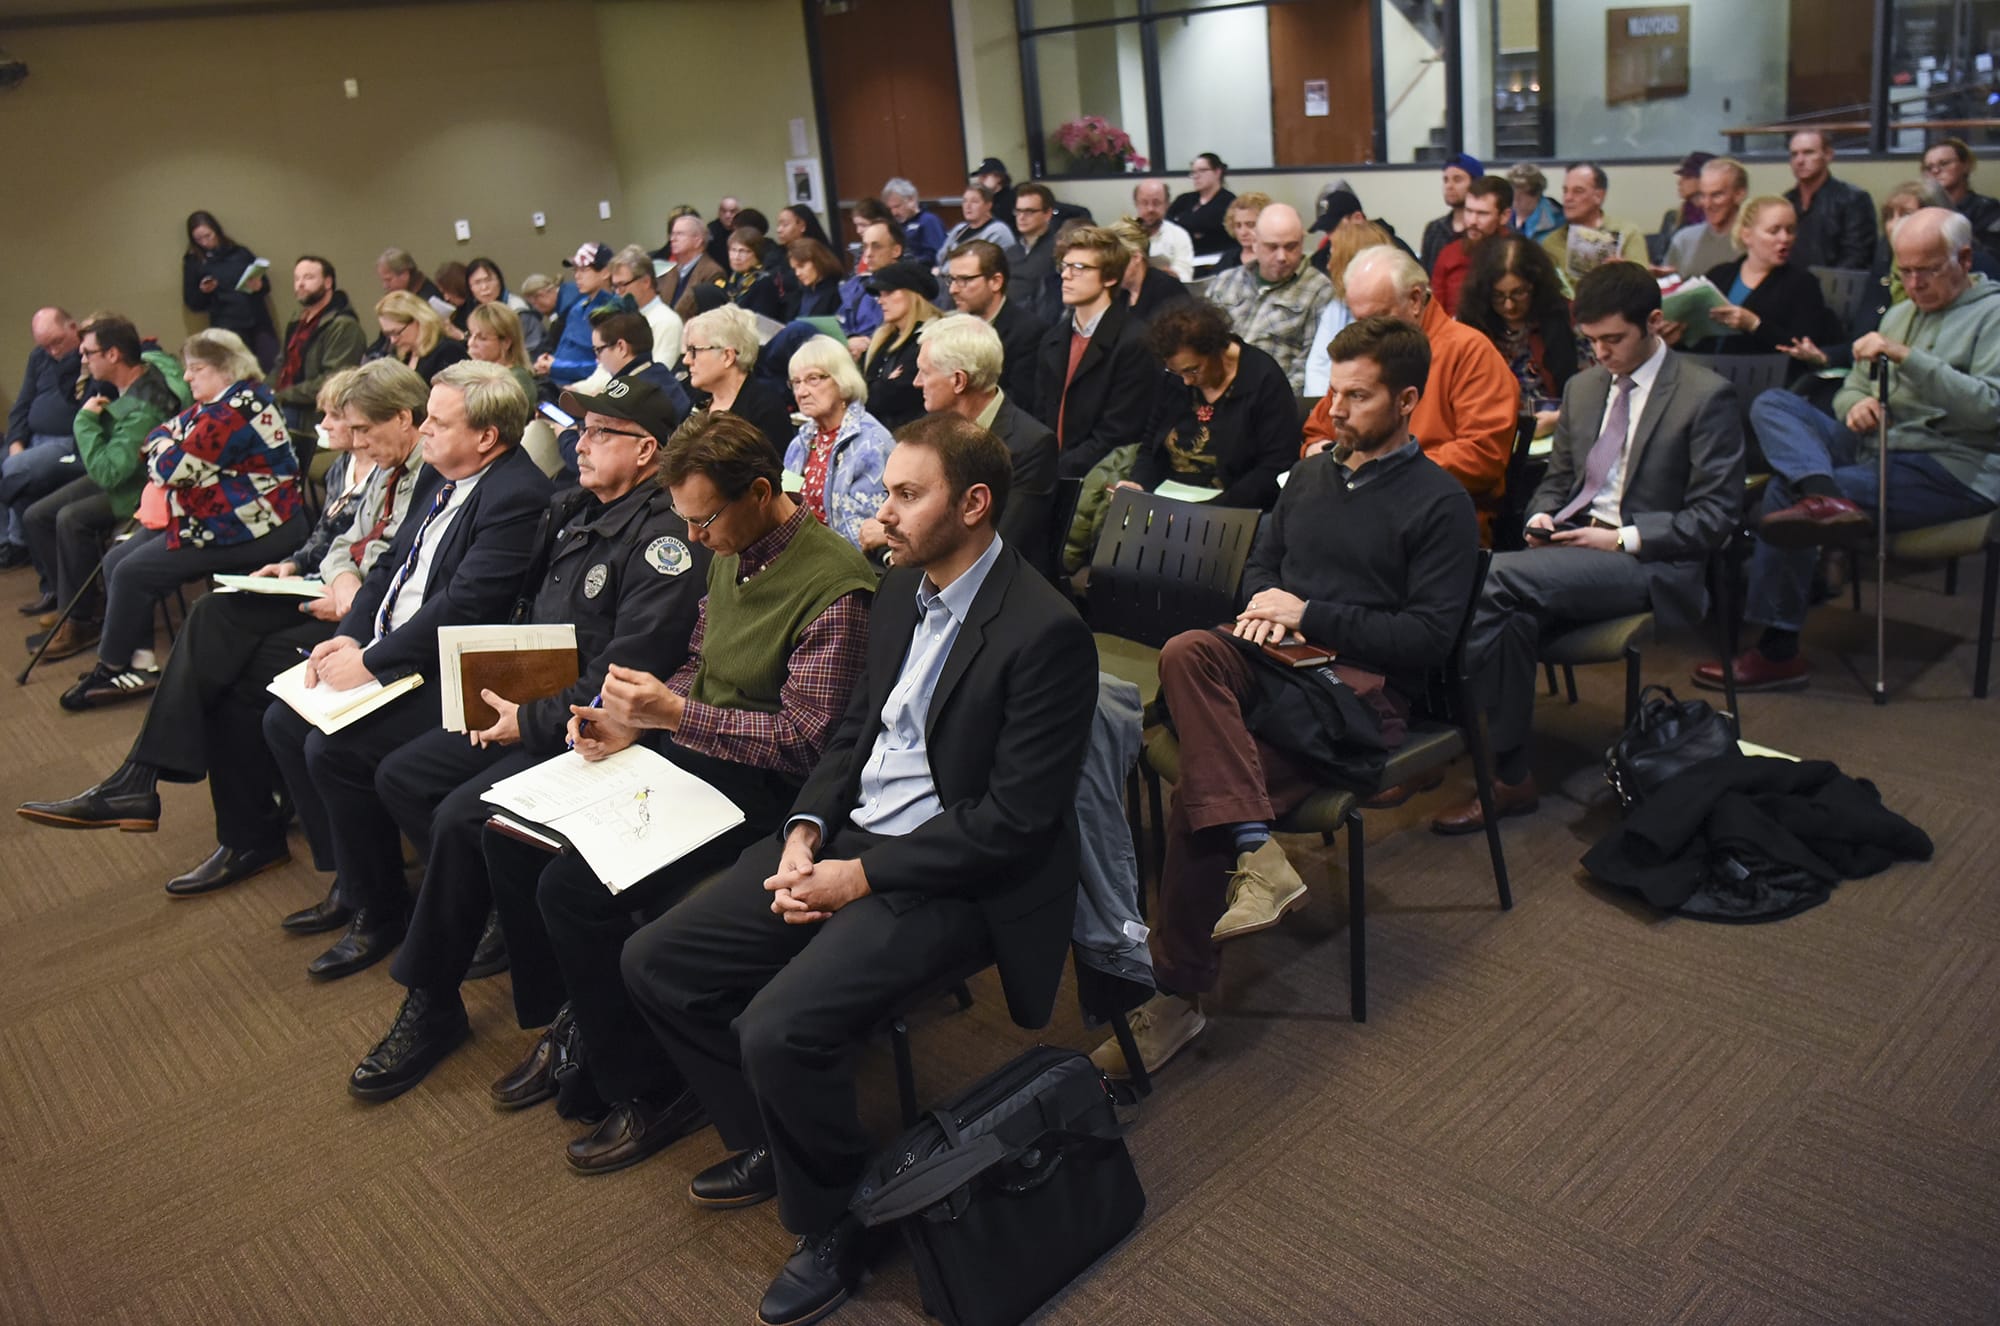 A large crowd of citizens and community members filled the council chambers at City Hall, Tuesday December 19, 2017, for the public hearing on the relocation of the day center to the former state Fish and Wildlife building in central Vancouver.